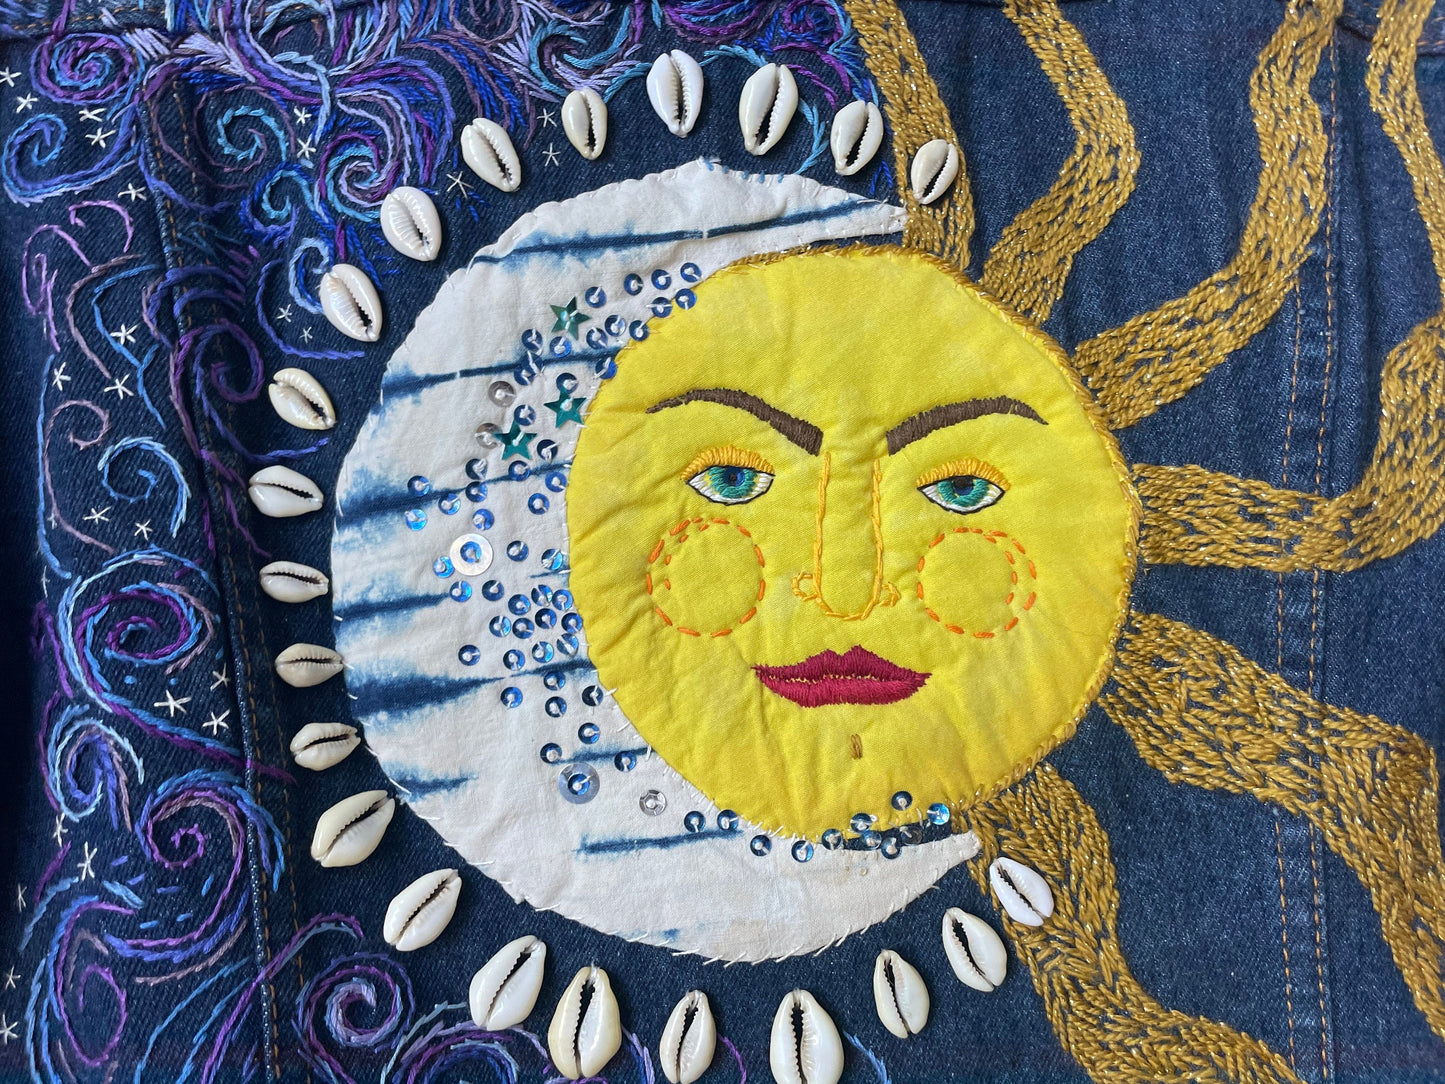 Celestial Hand-Embroidered Mixed-Media Art Jacket. Upcycled Denim. One of a Kind. Keep it Cosmic. Sun & Moon